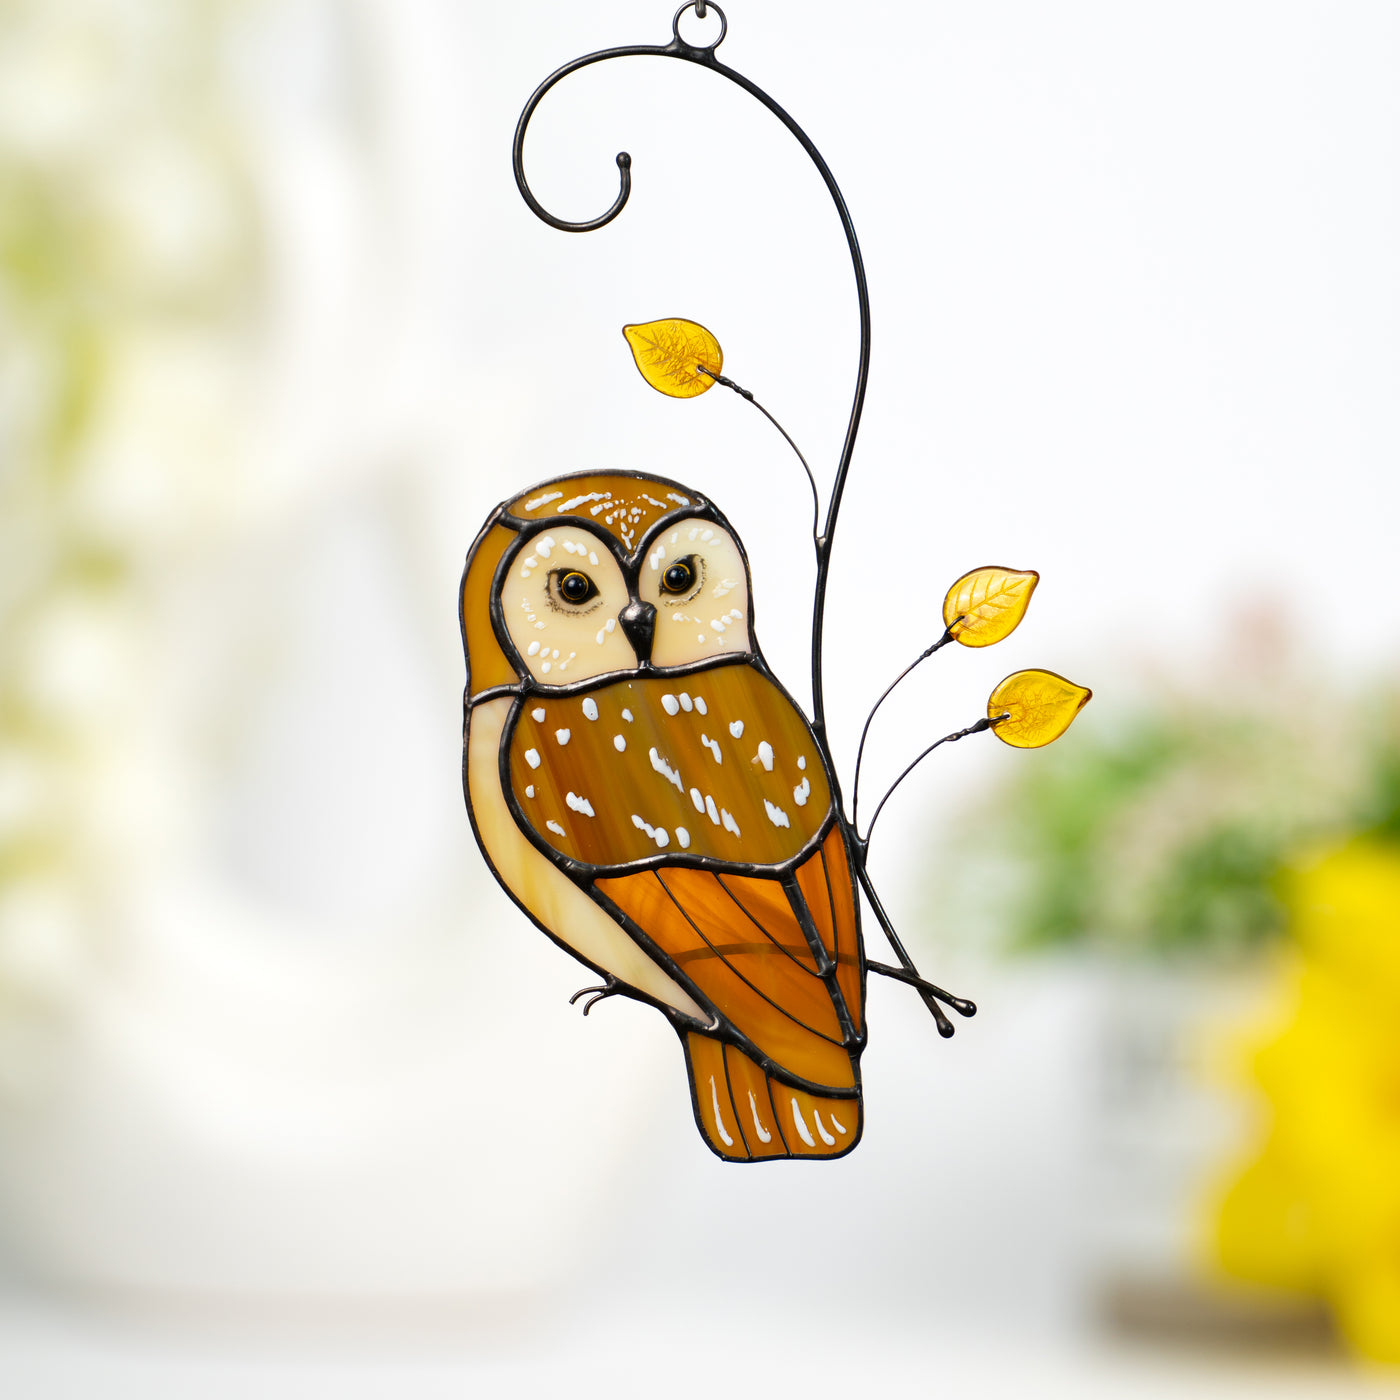 Stained glass window hanging of an owl on the branch